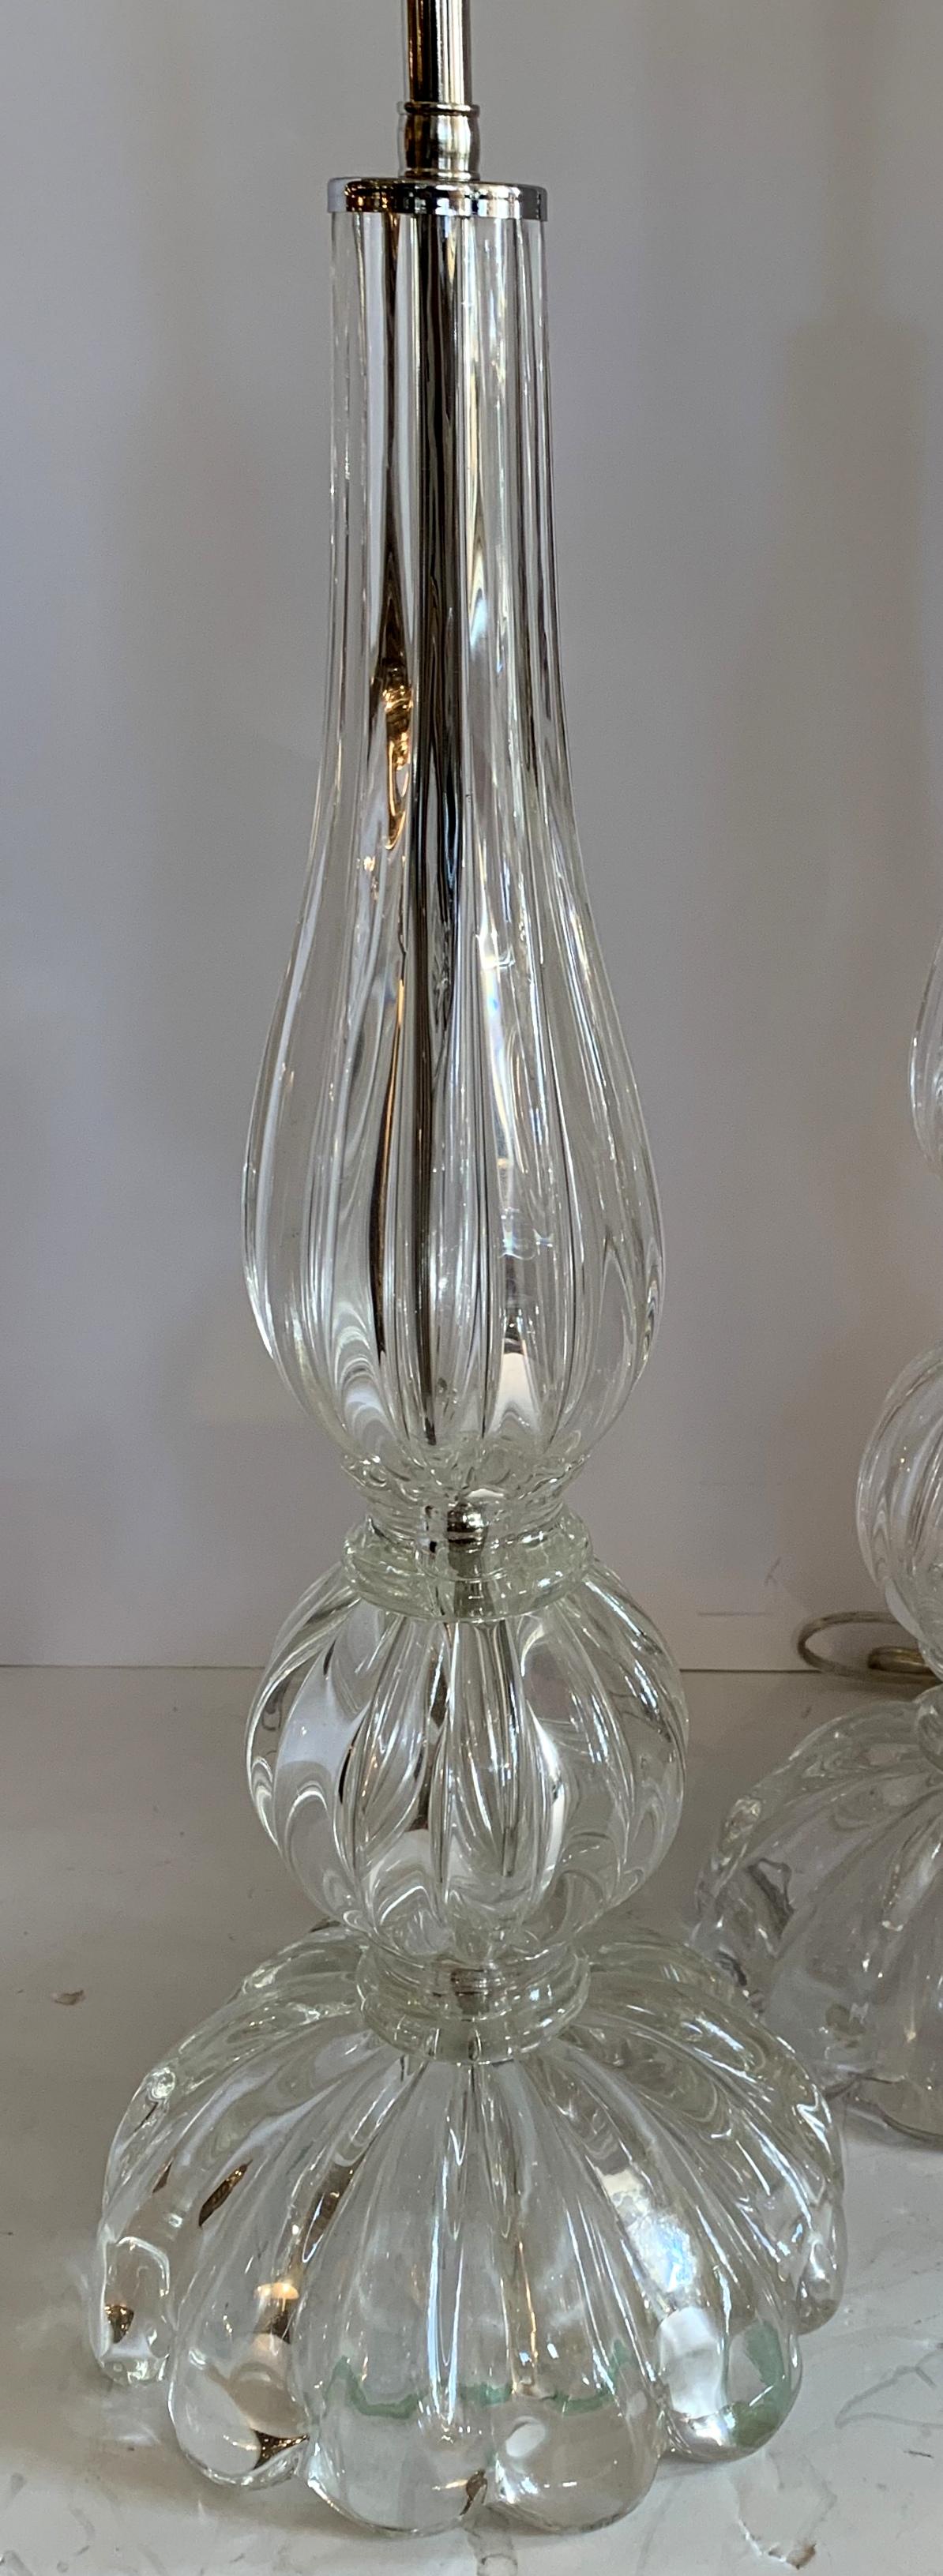 Polished Mid-Century Modern Pair Italian Murano Seguso Venetian Clear Fluted Glass Lamps